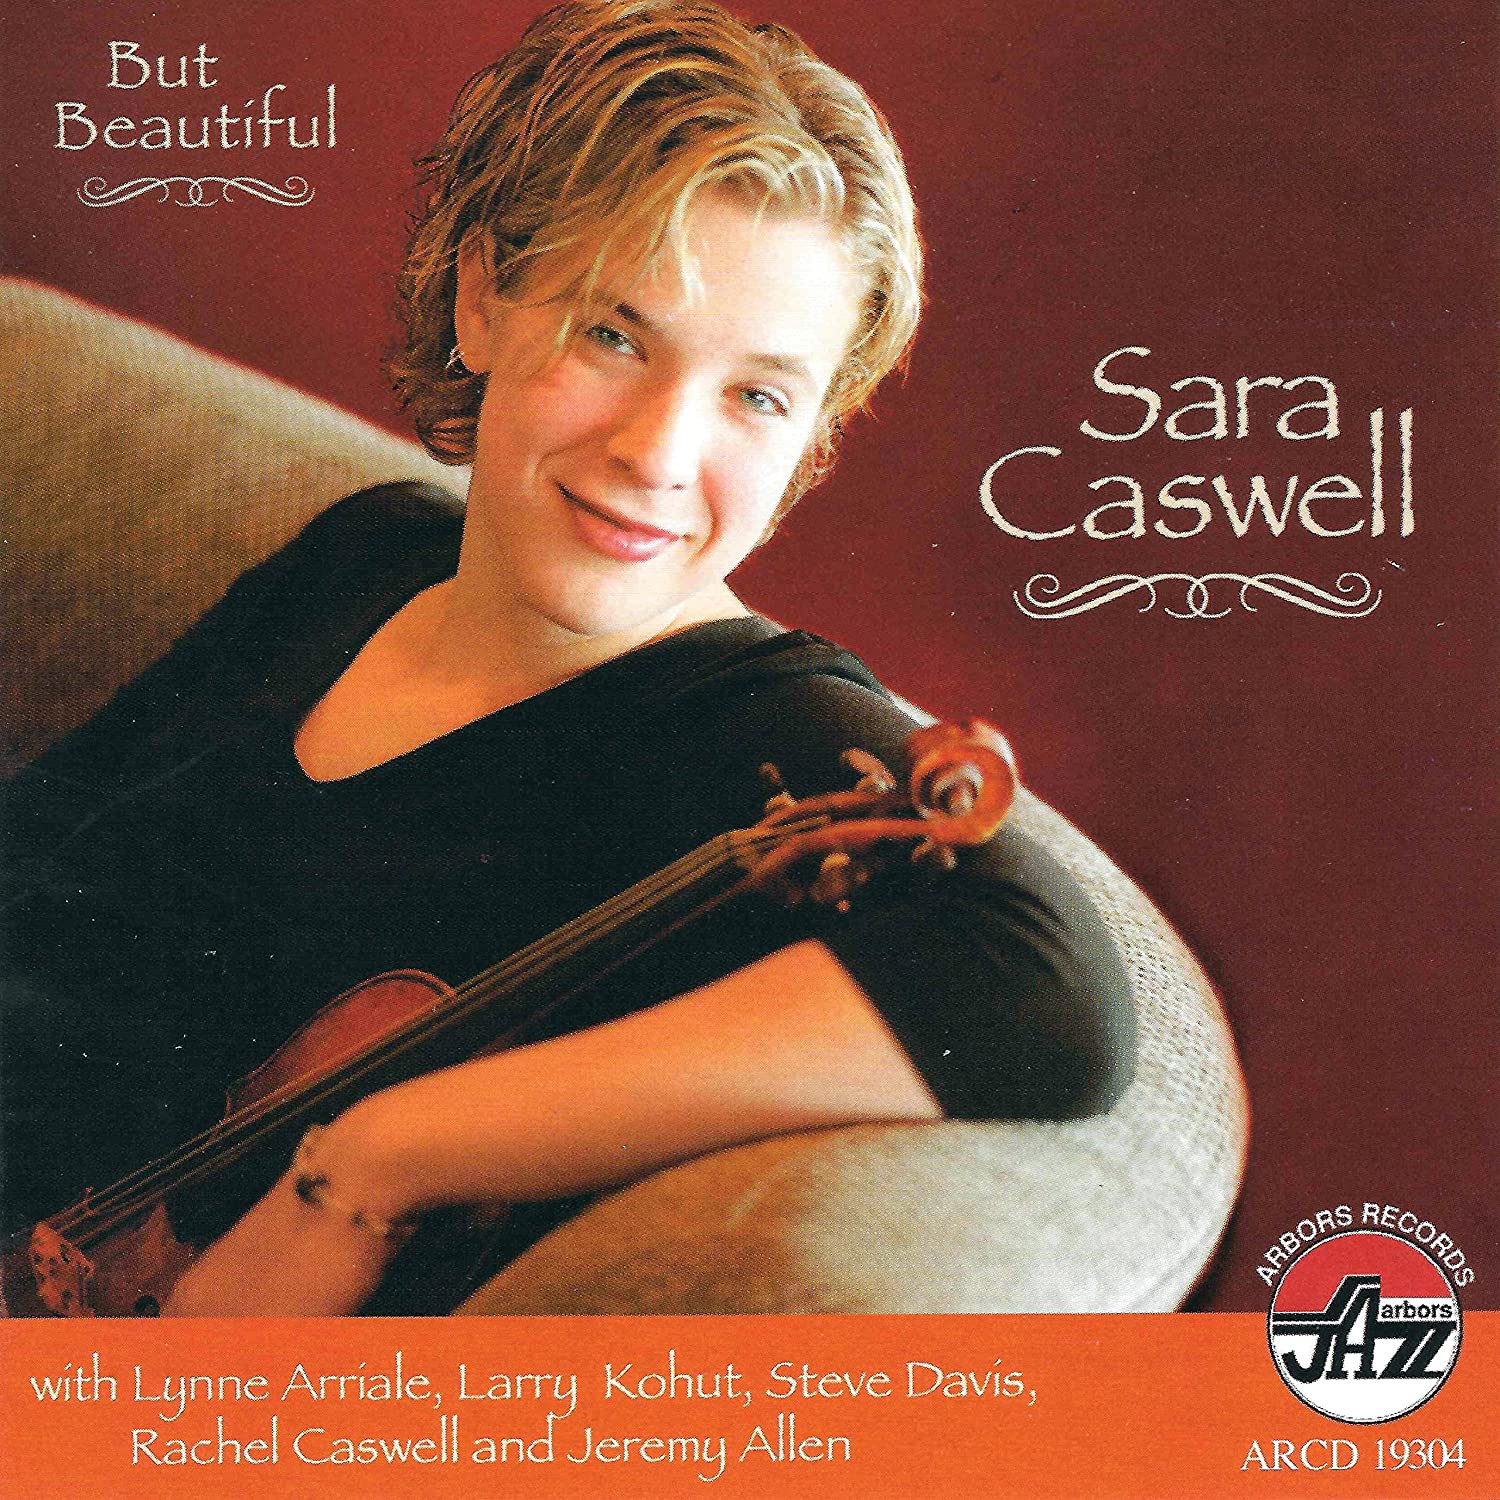 SARA CASWELL - But Beautiful cover 